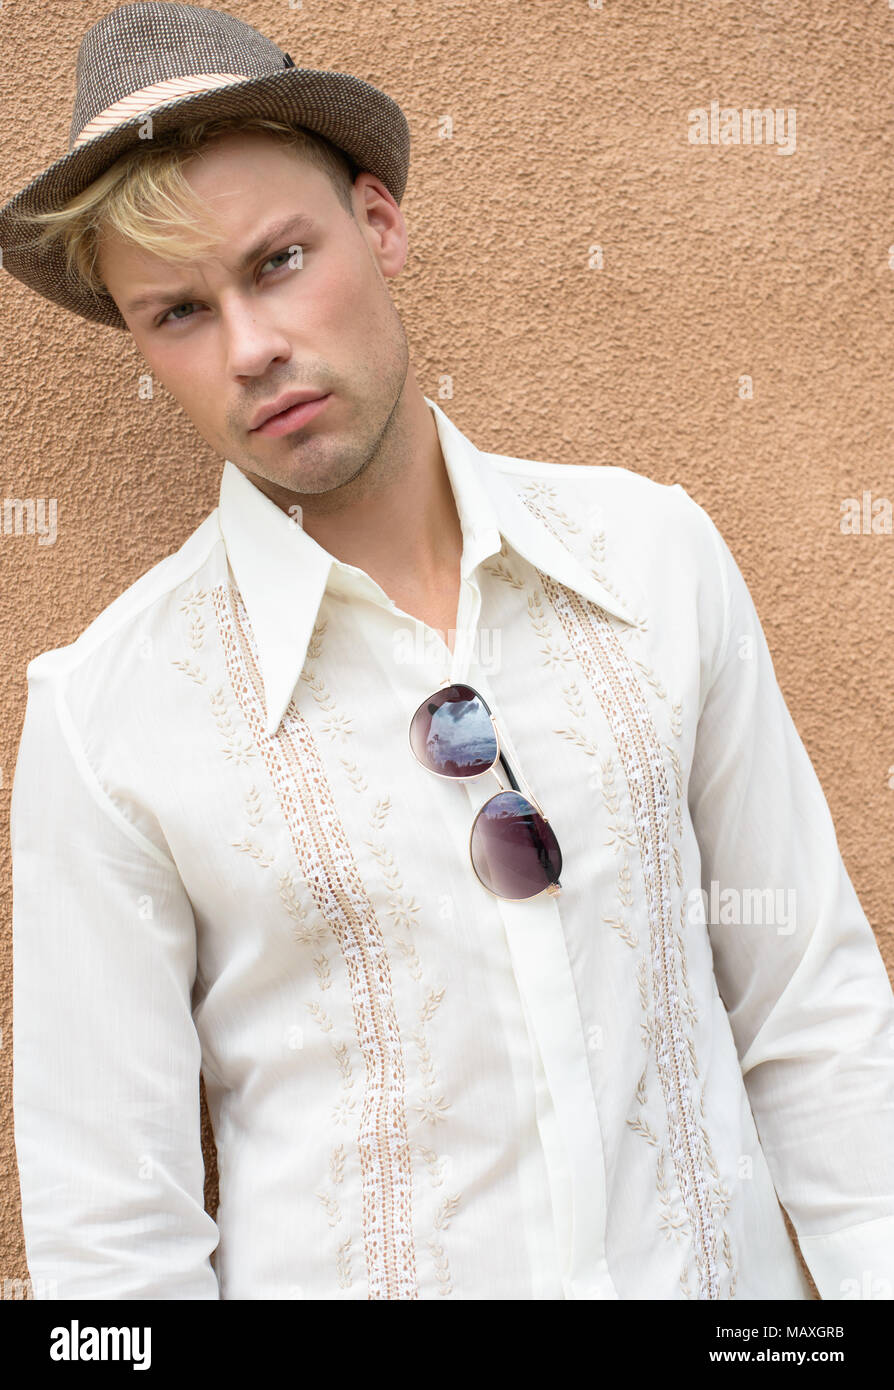 A Caucasian man, male model posing wearing men's 70s vintage shirt and hat, a men's vintage fashion editorial concept. Stock Photo